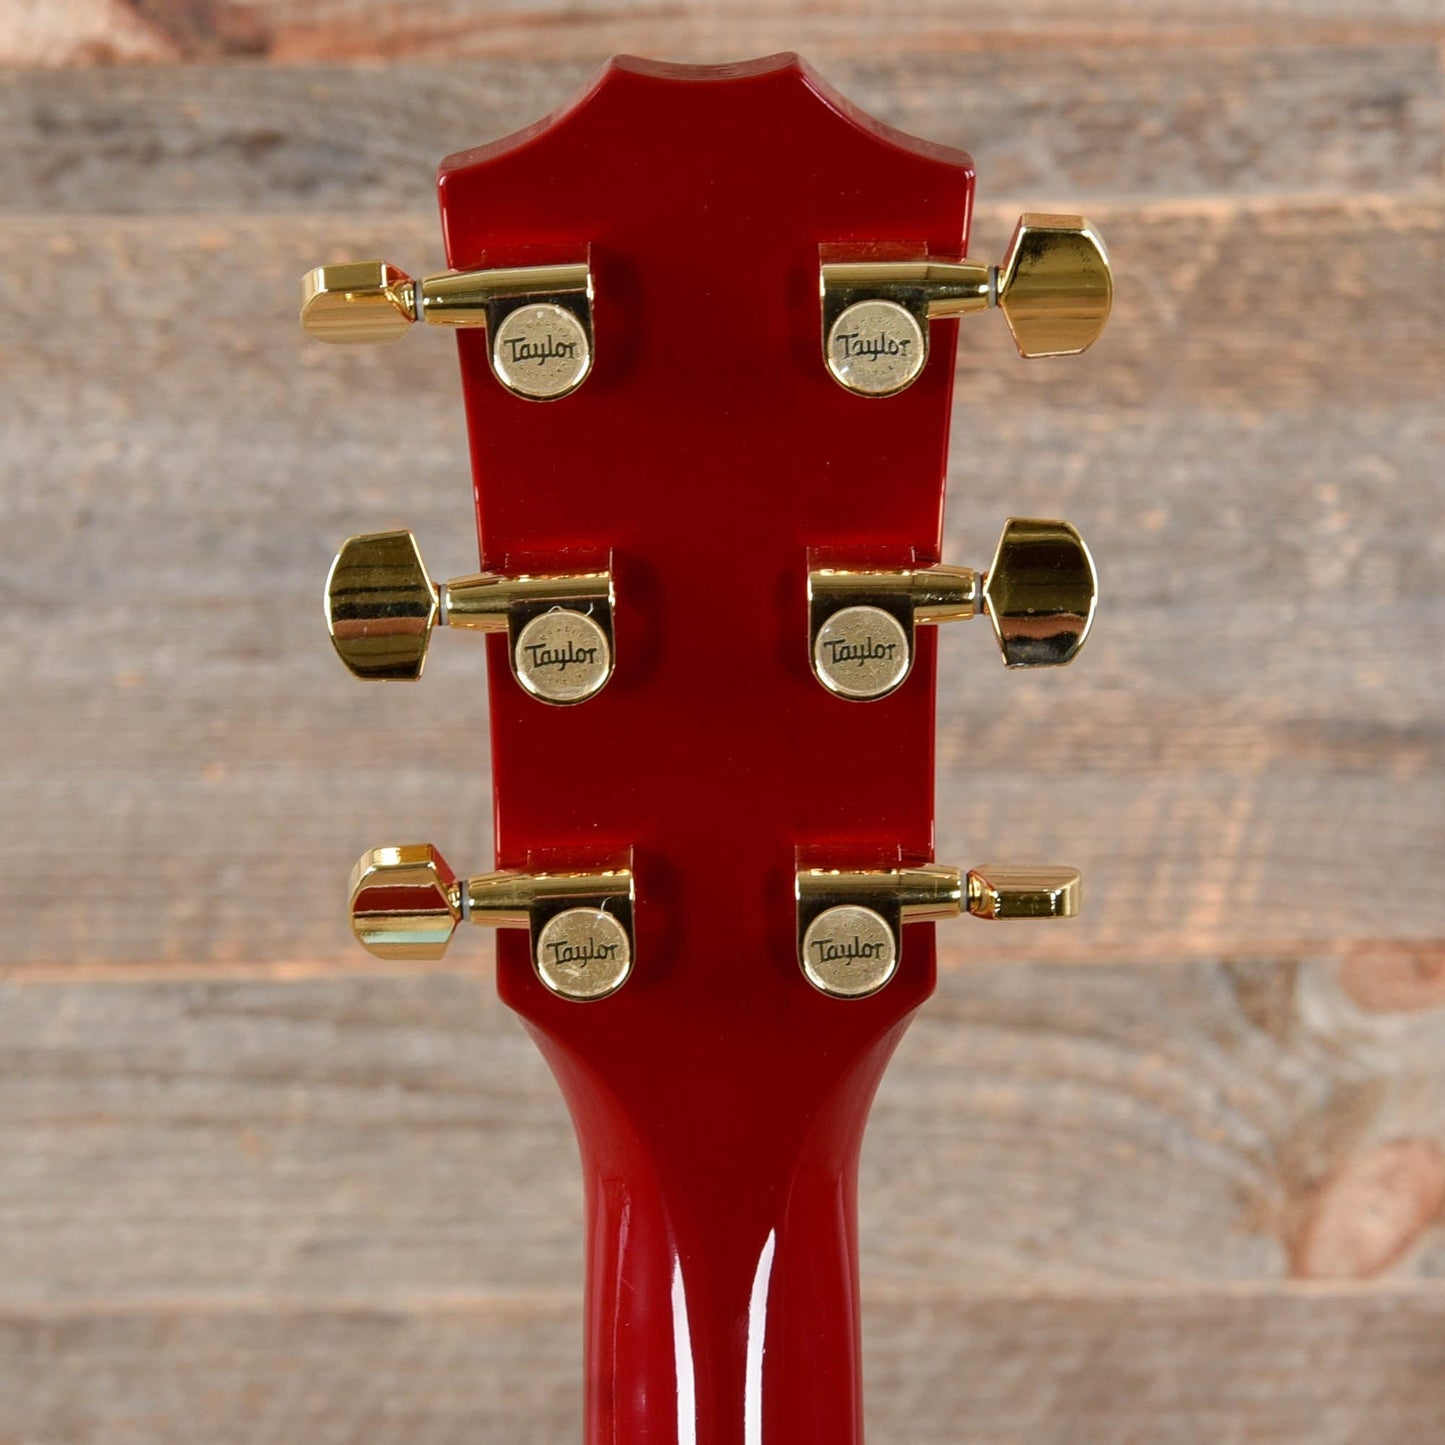 Taylor 214ce-RED Deluxe Grand Auditorium Sitka/Maple Red ES2 w/Hardshell Case Acoustic Guitars / OM and Auditorium